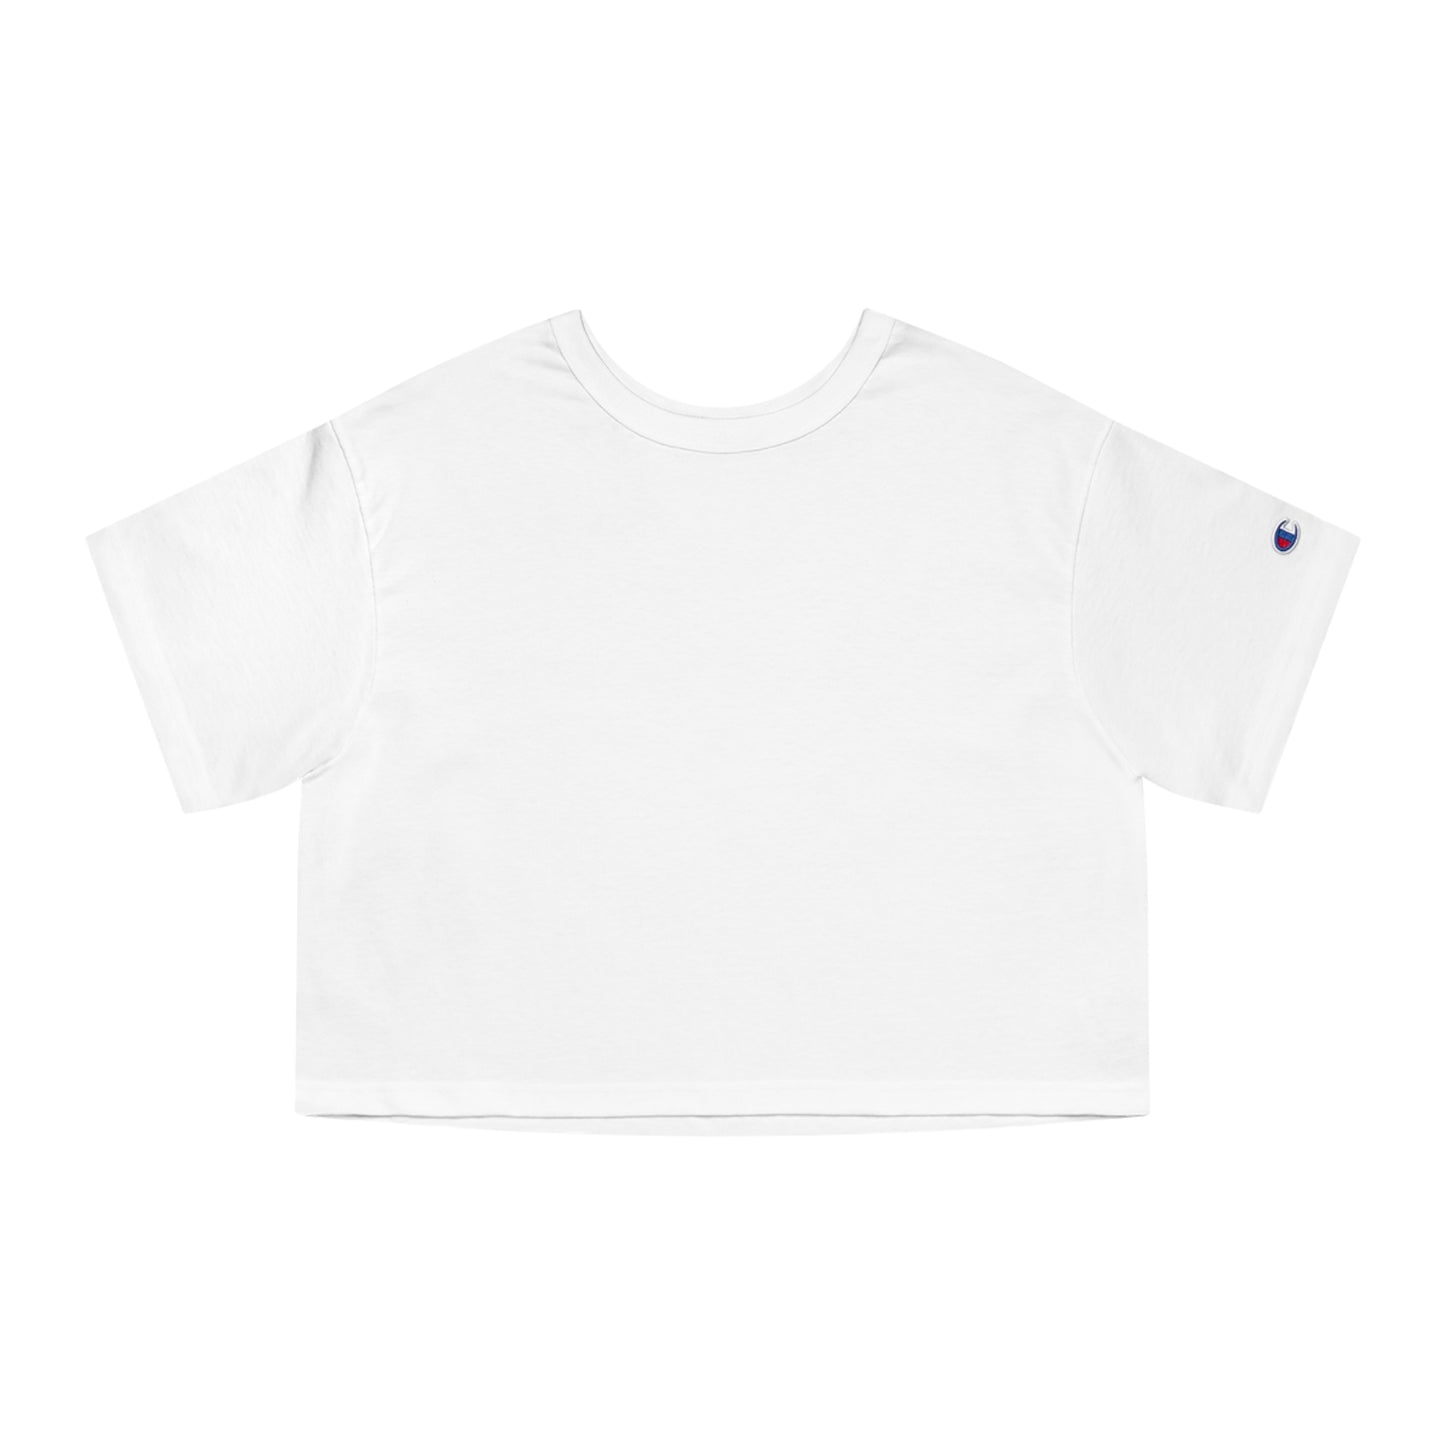 Do Everything In Love | Anna | Back | Champion Women's Heritage Cropped T-Shirt